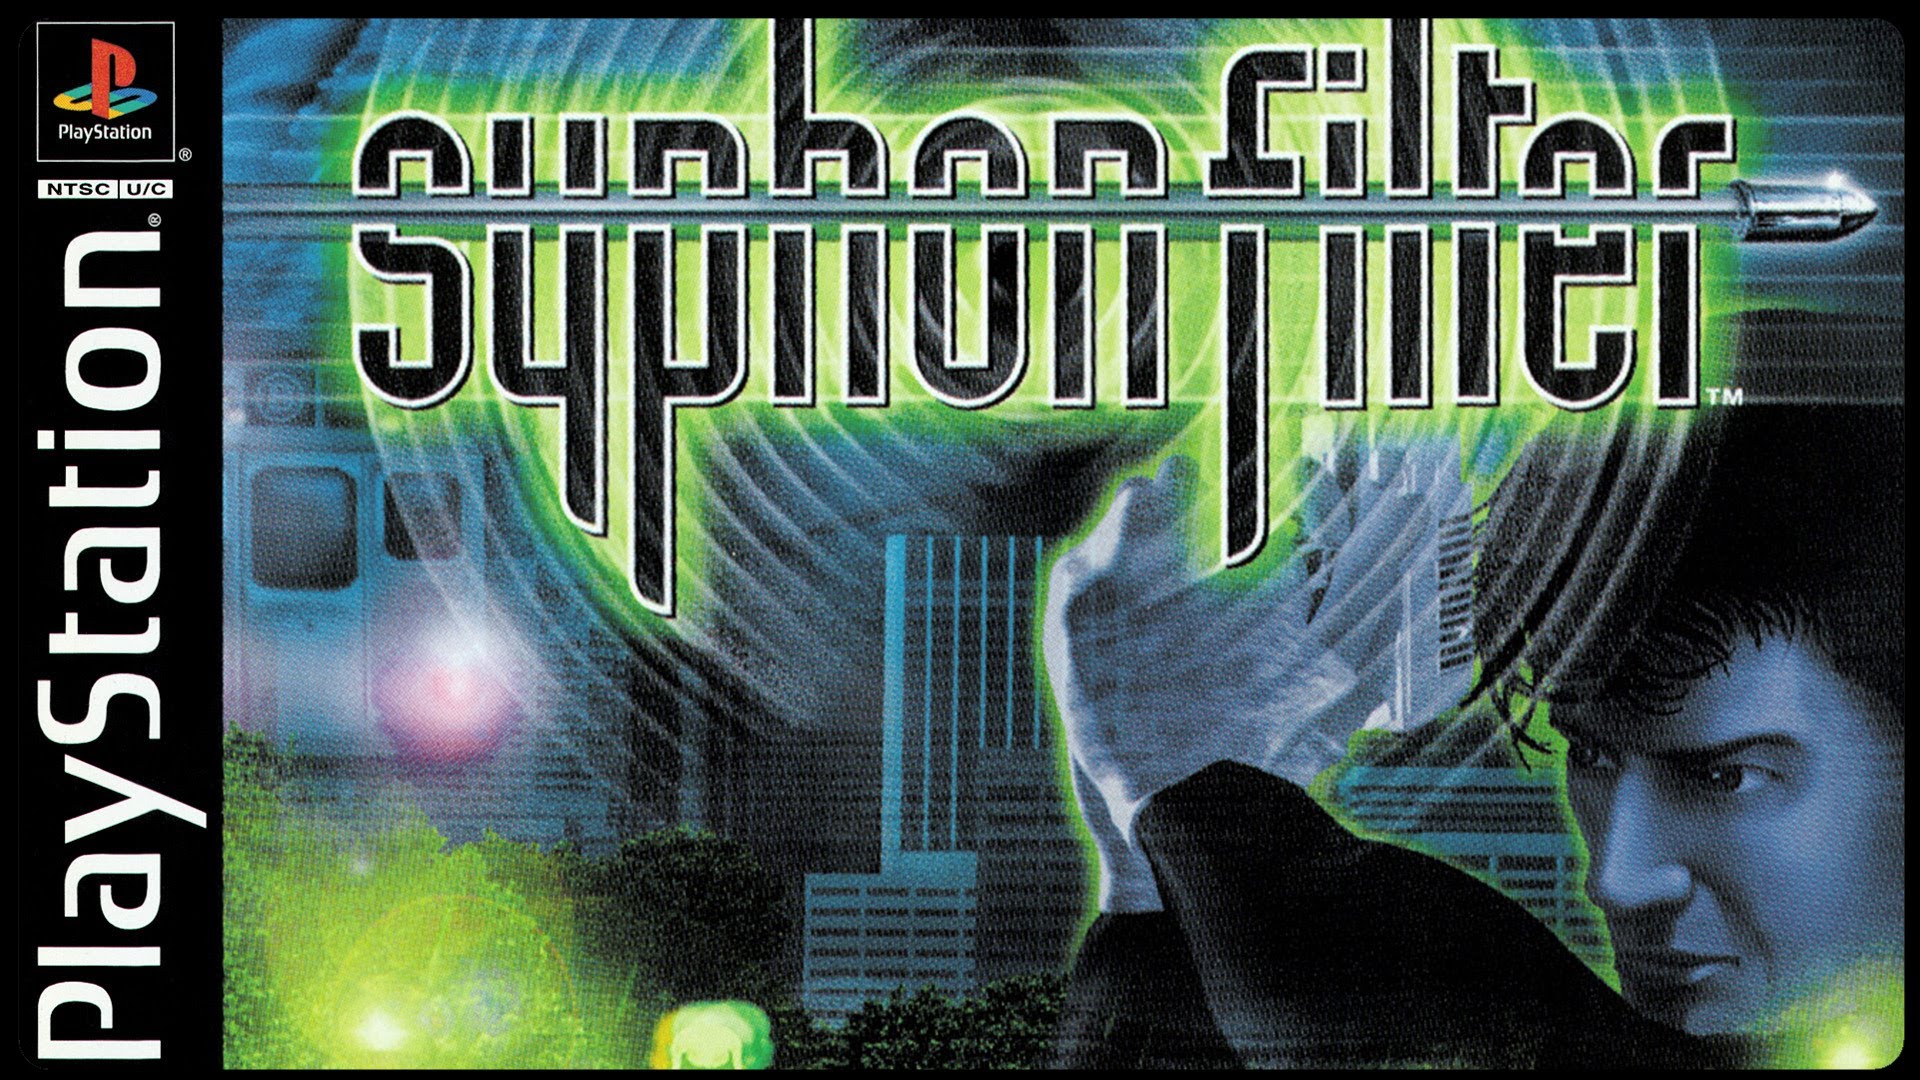 Syphon Filter Adds Trophies to PlayStation Plus Premium